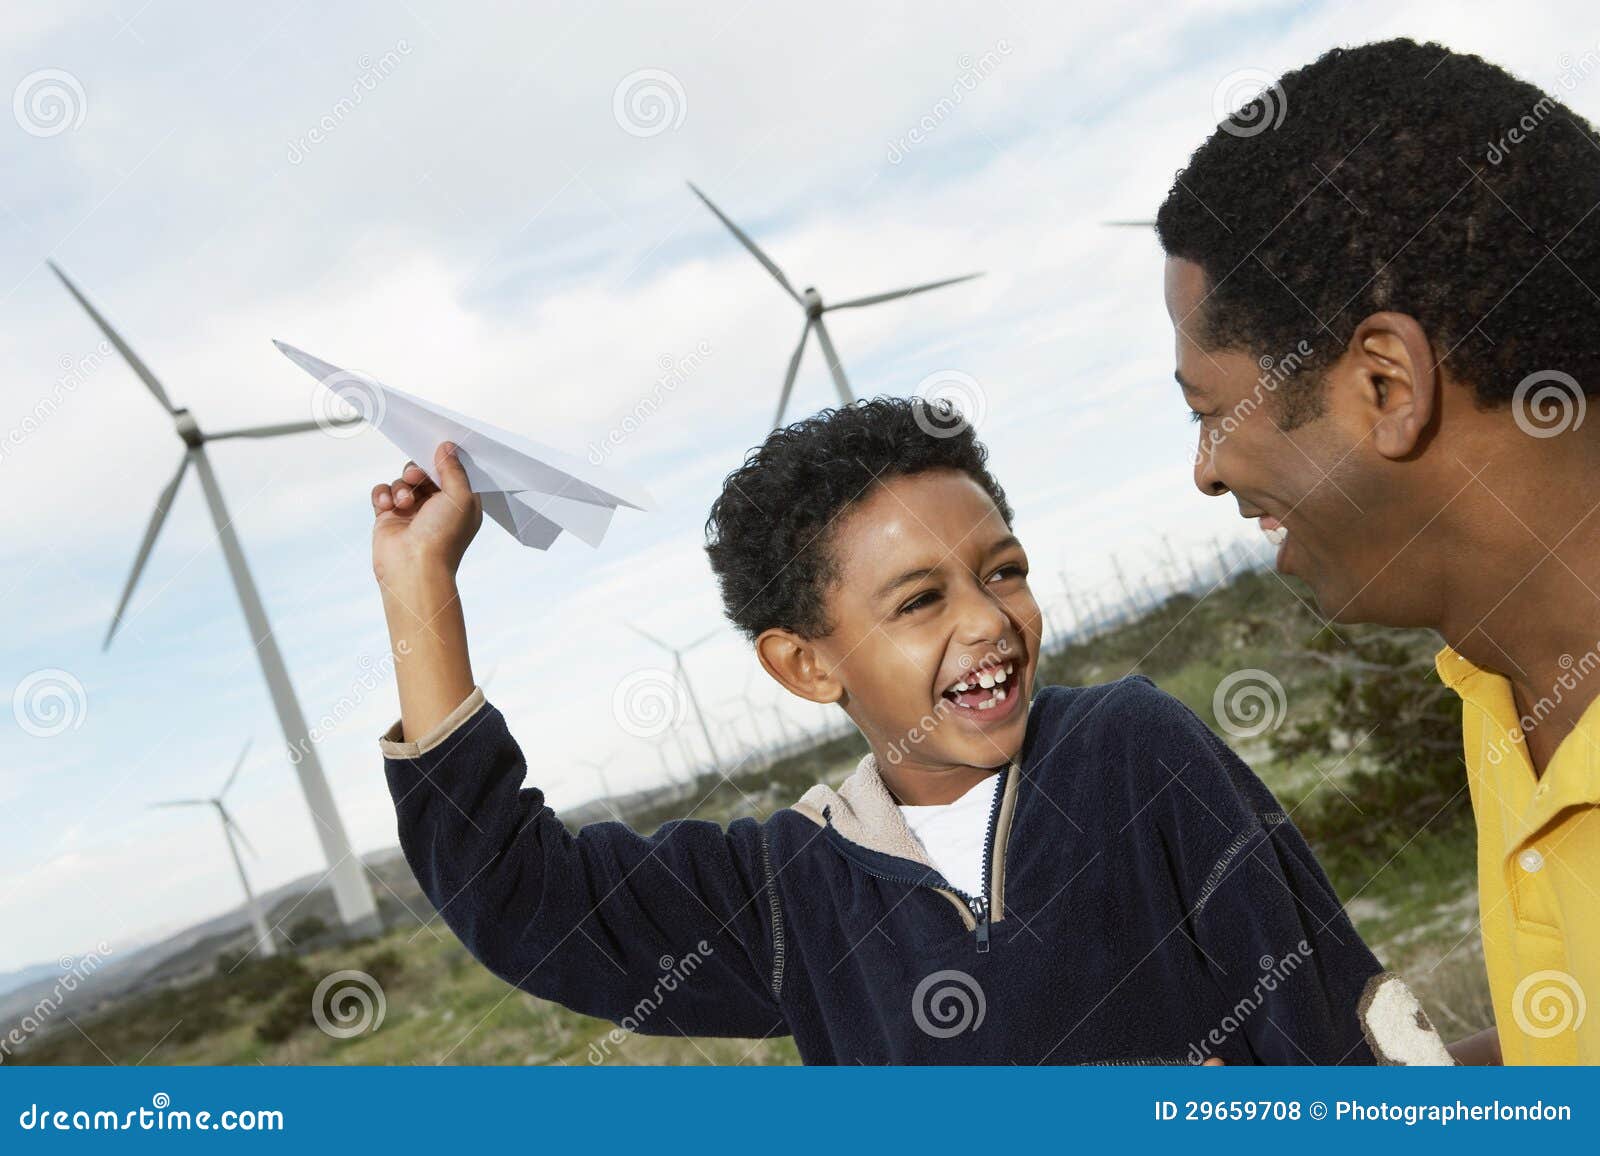 father and son playing with paper plane